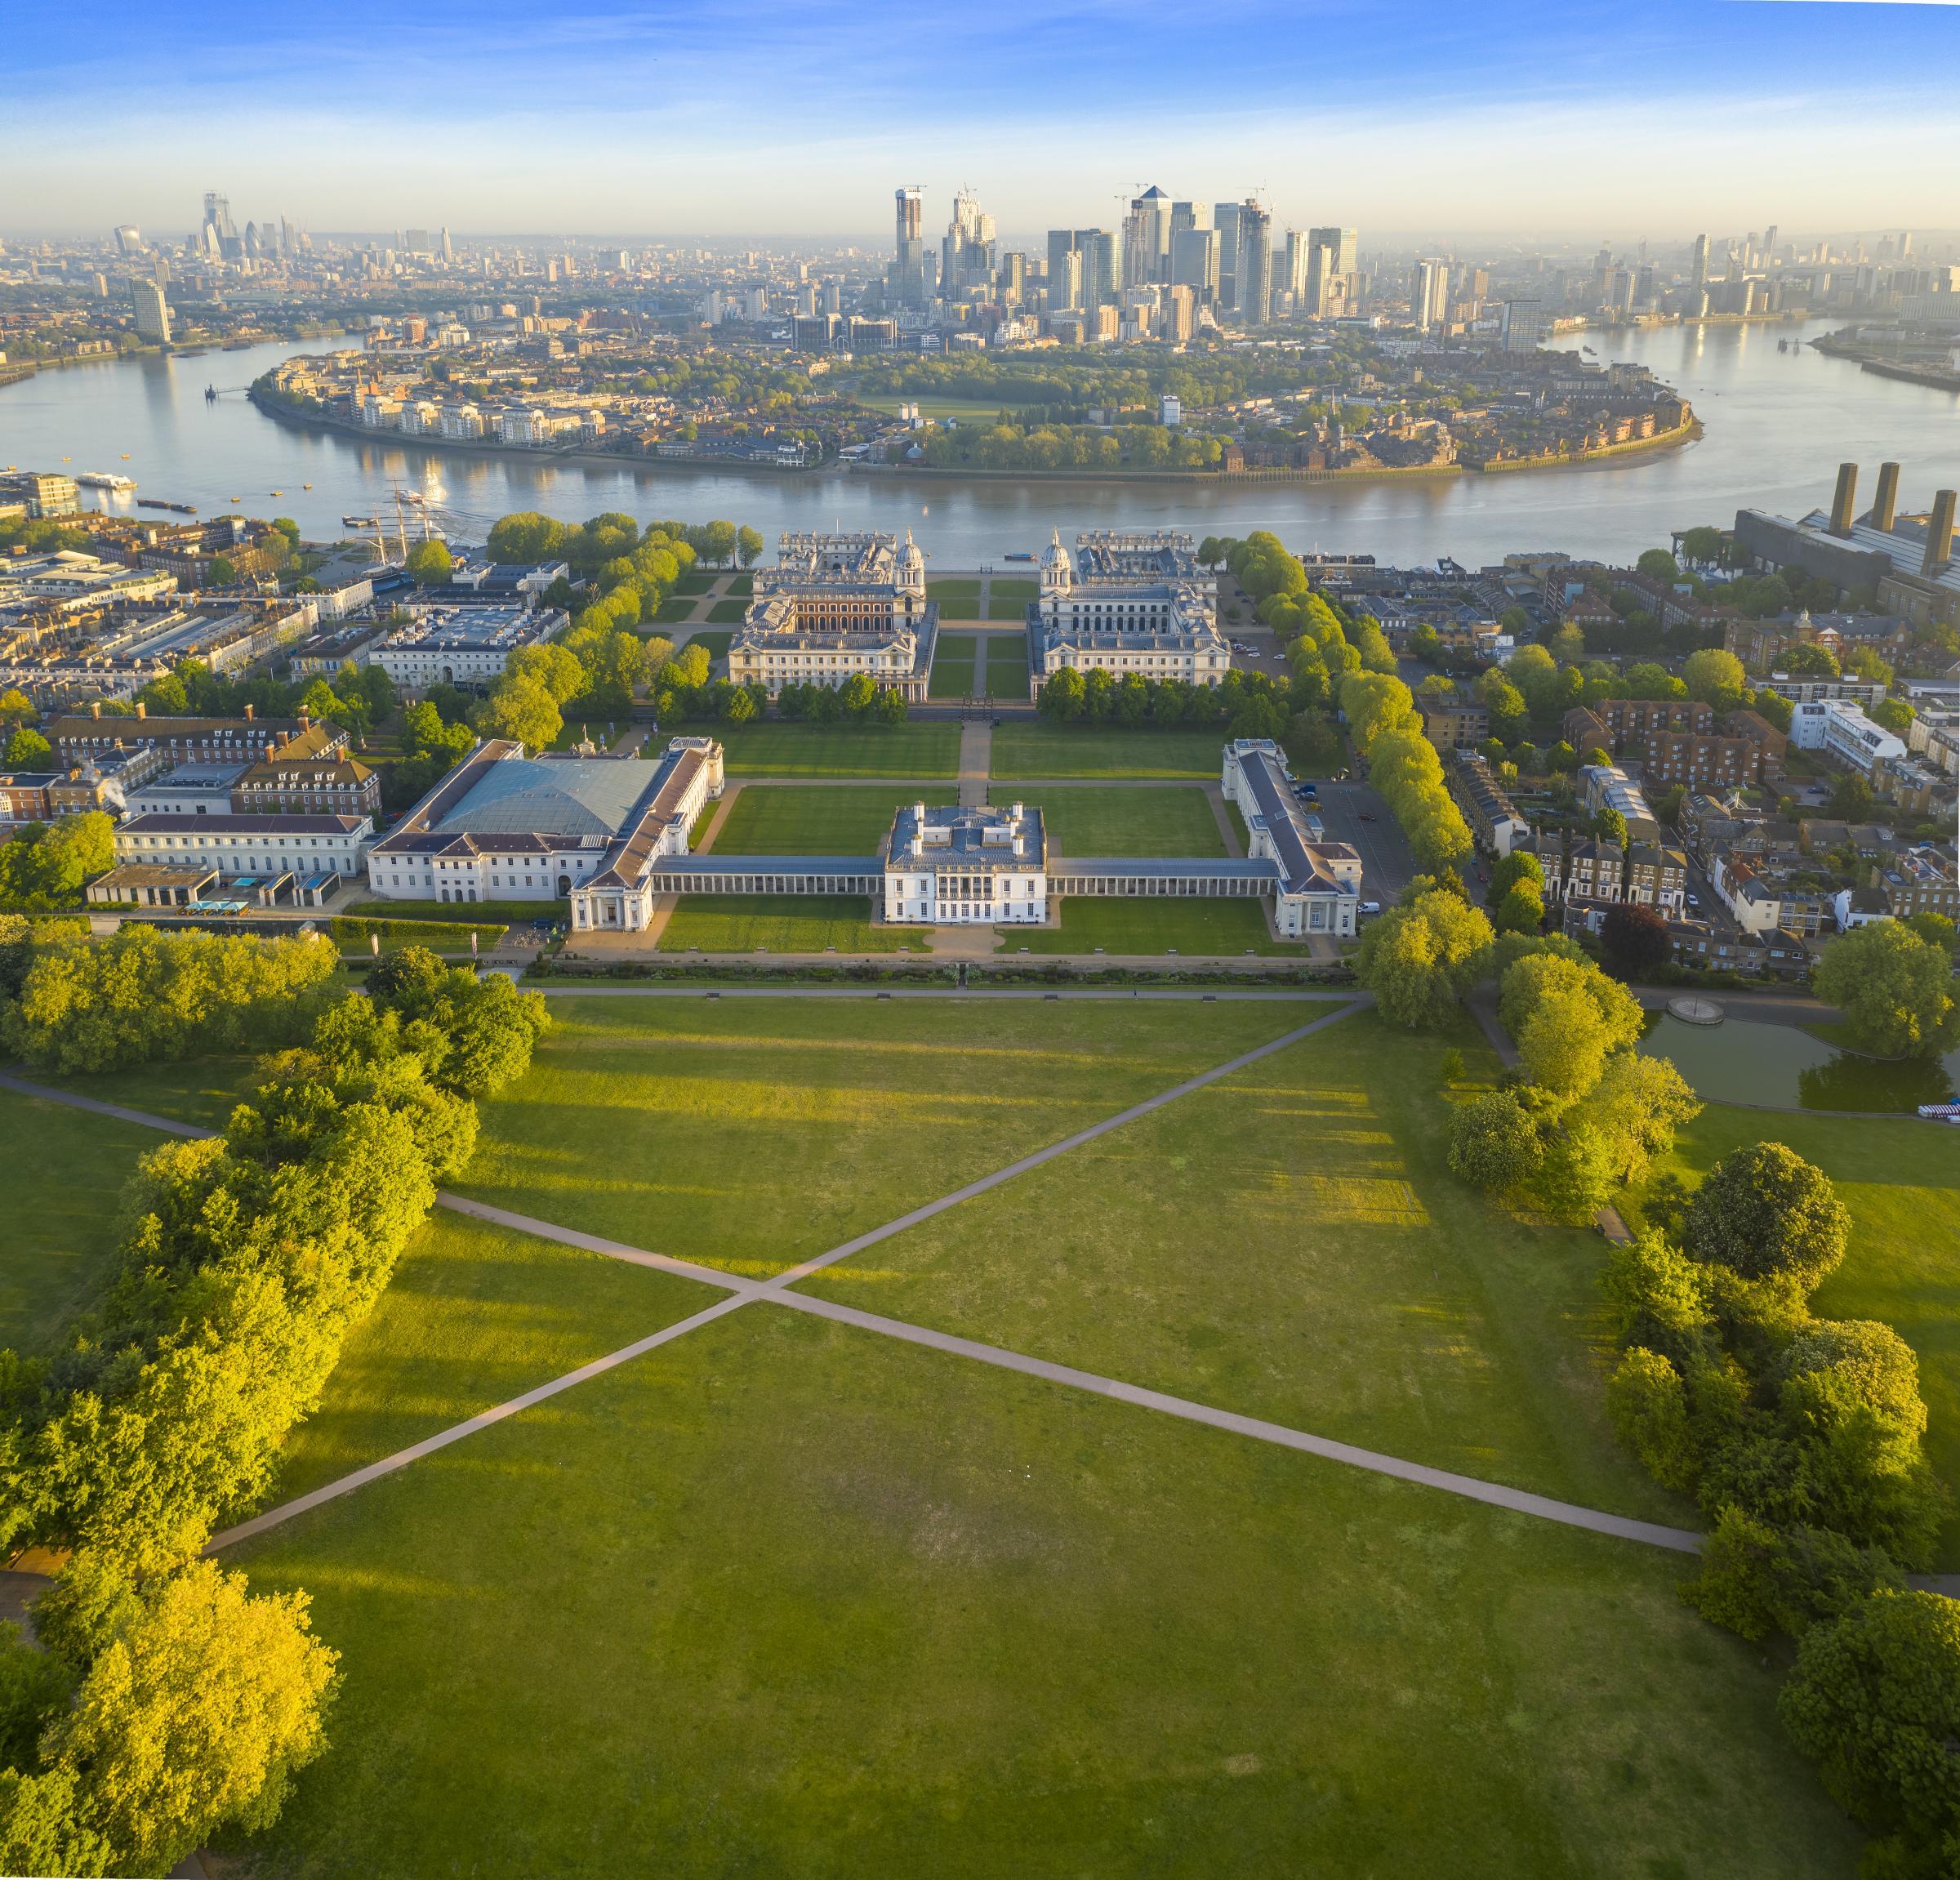 The Royal Borough of Greenwich